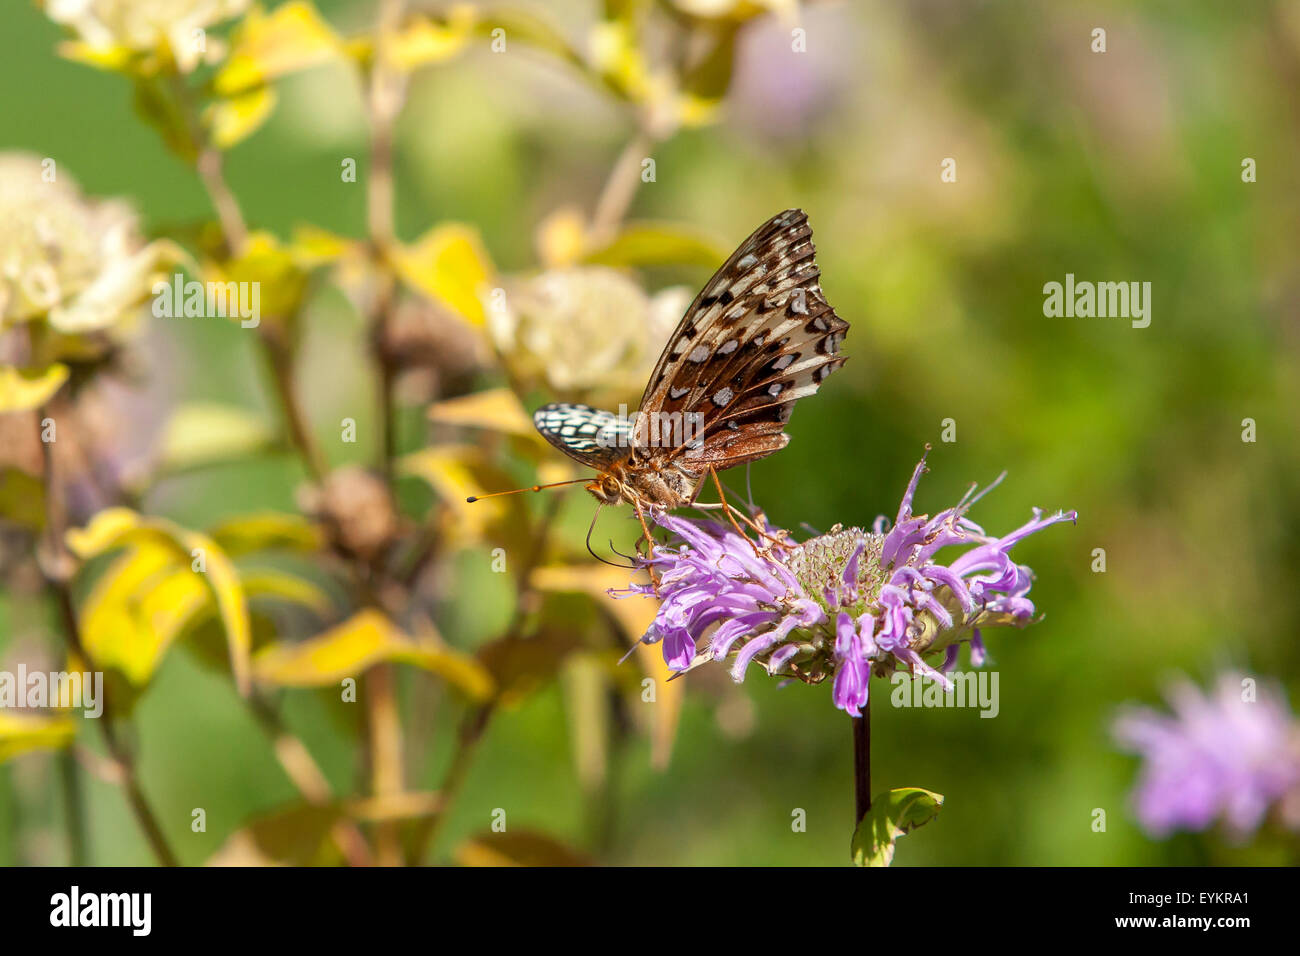 Butterfly on a flower. Stock Photo